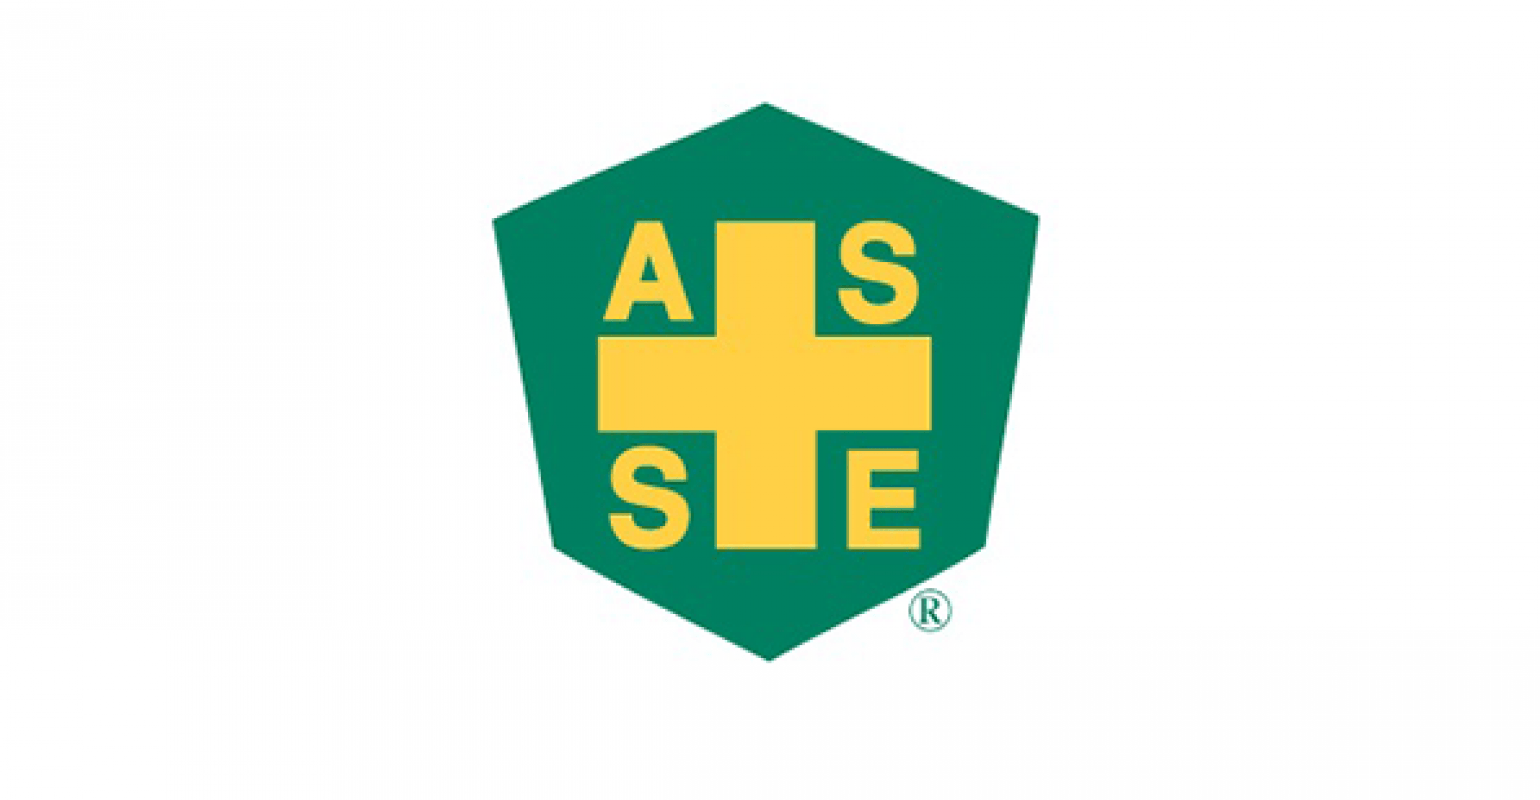 EHS Logo - ASSE Proposes Name Change to American Society of Safety ...